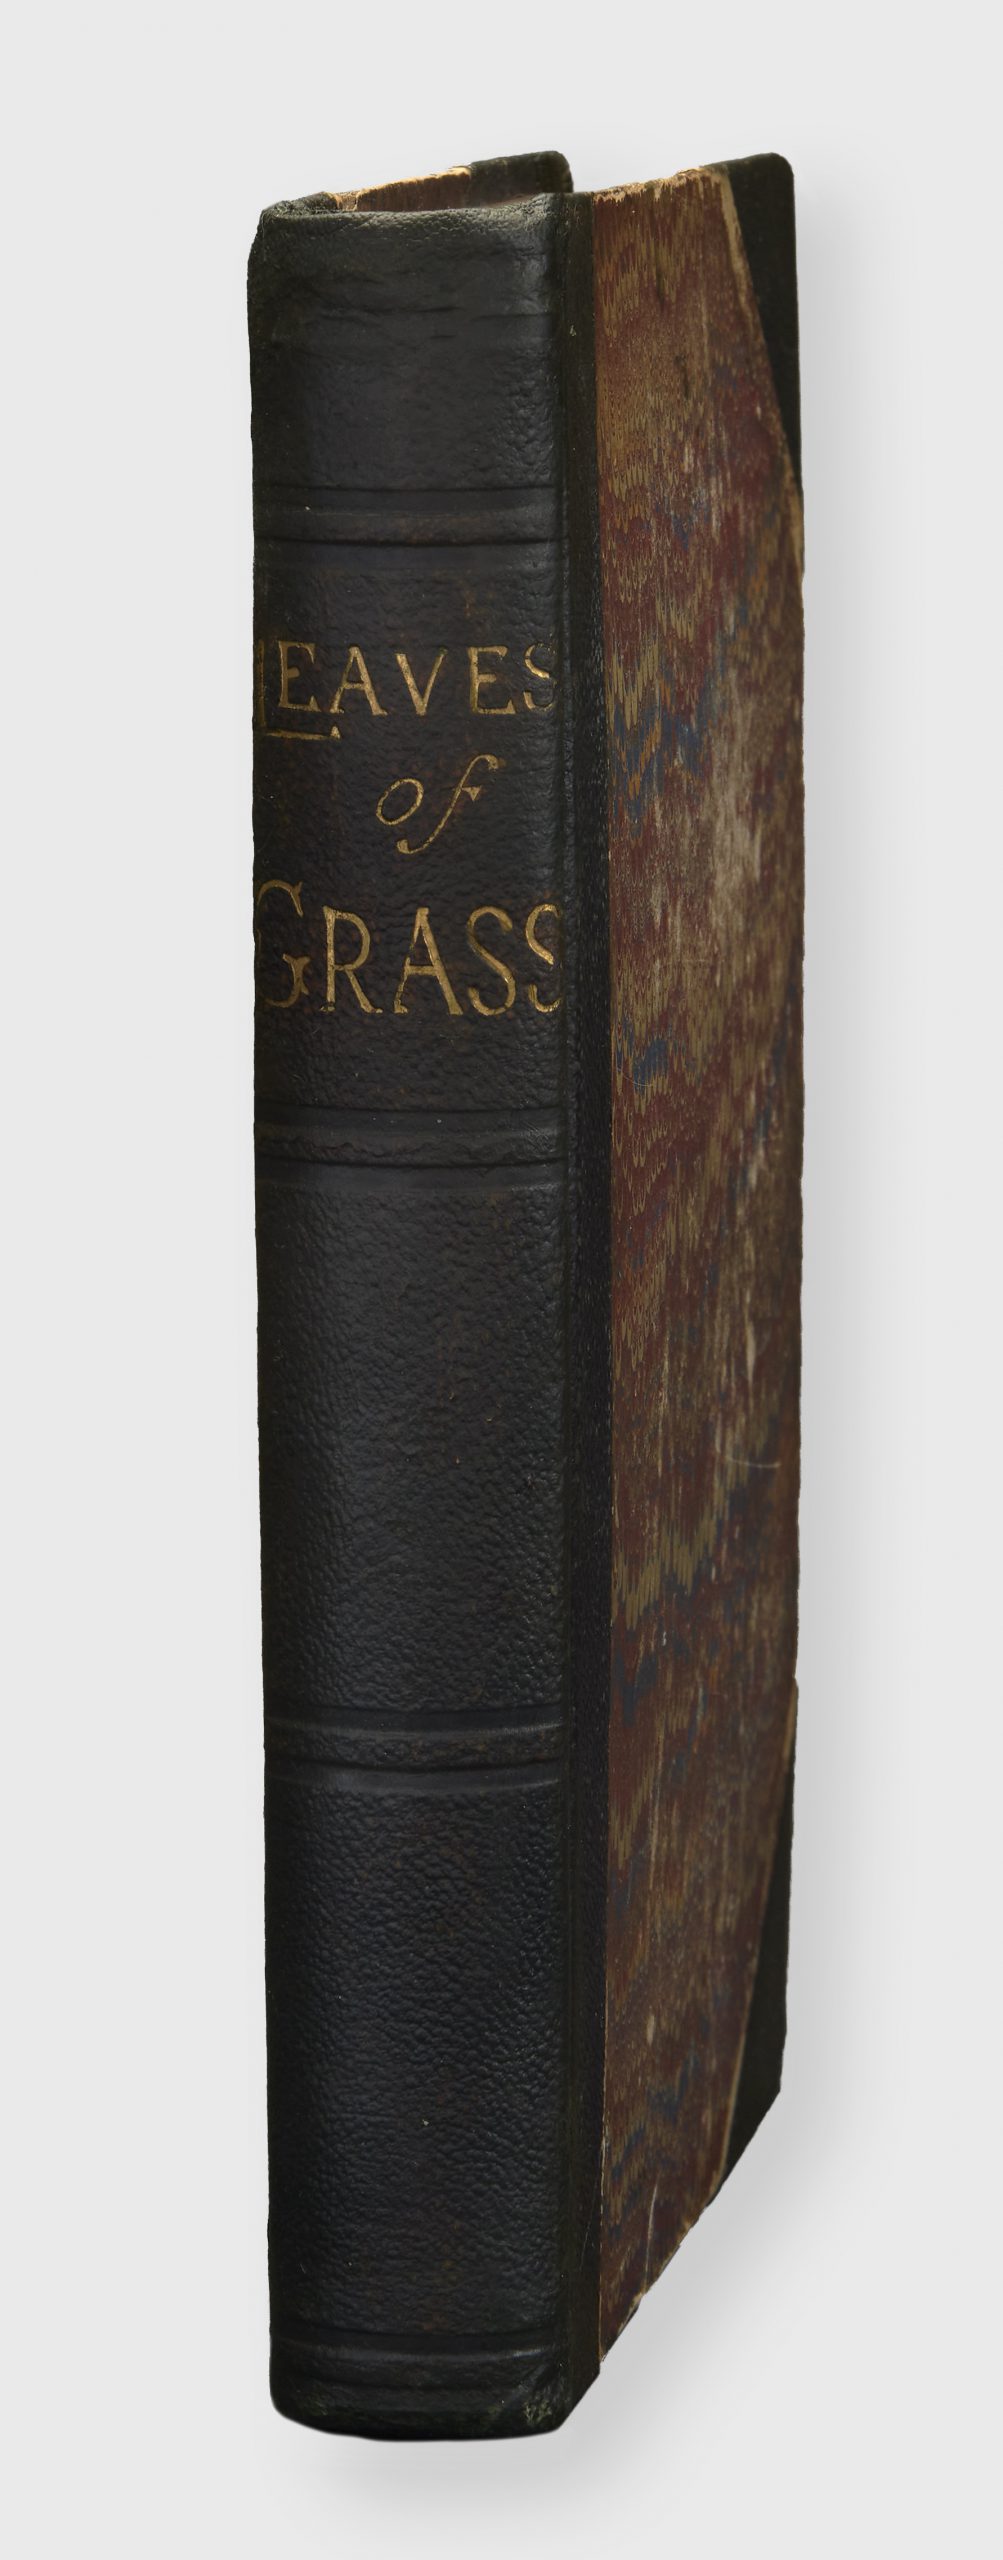 leaves of grass controversy